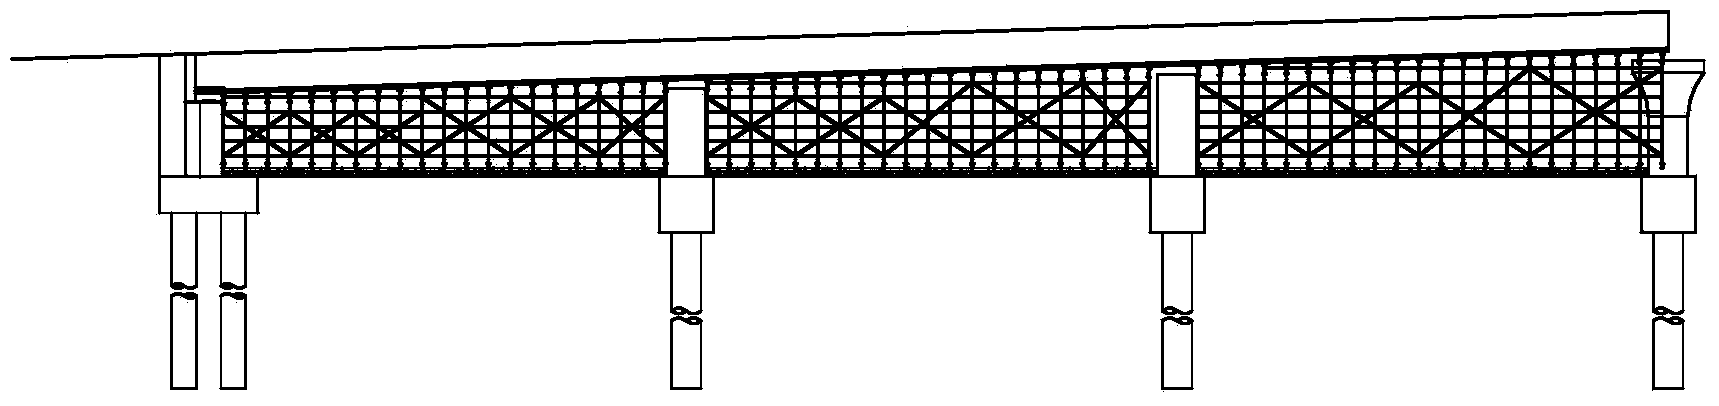 Support structure for realizing no-cushion cap approach viaduct concrete box girder less-support cast-in-place